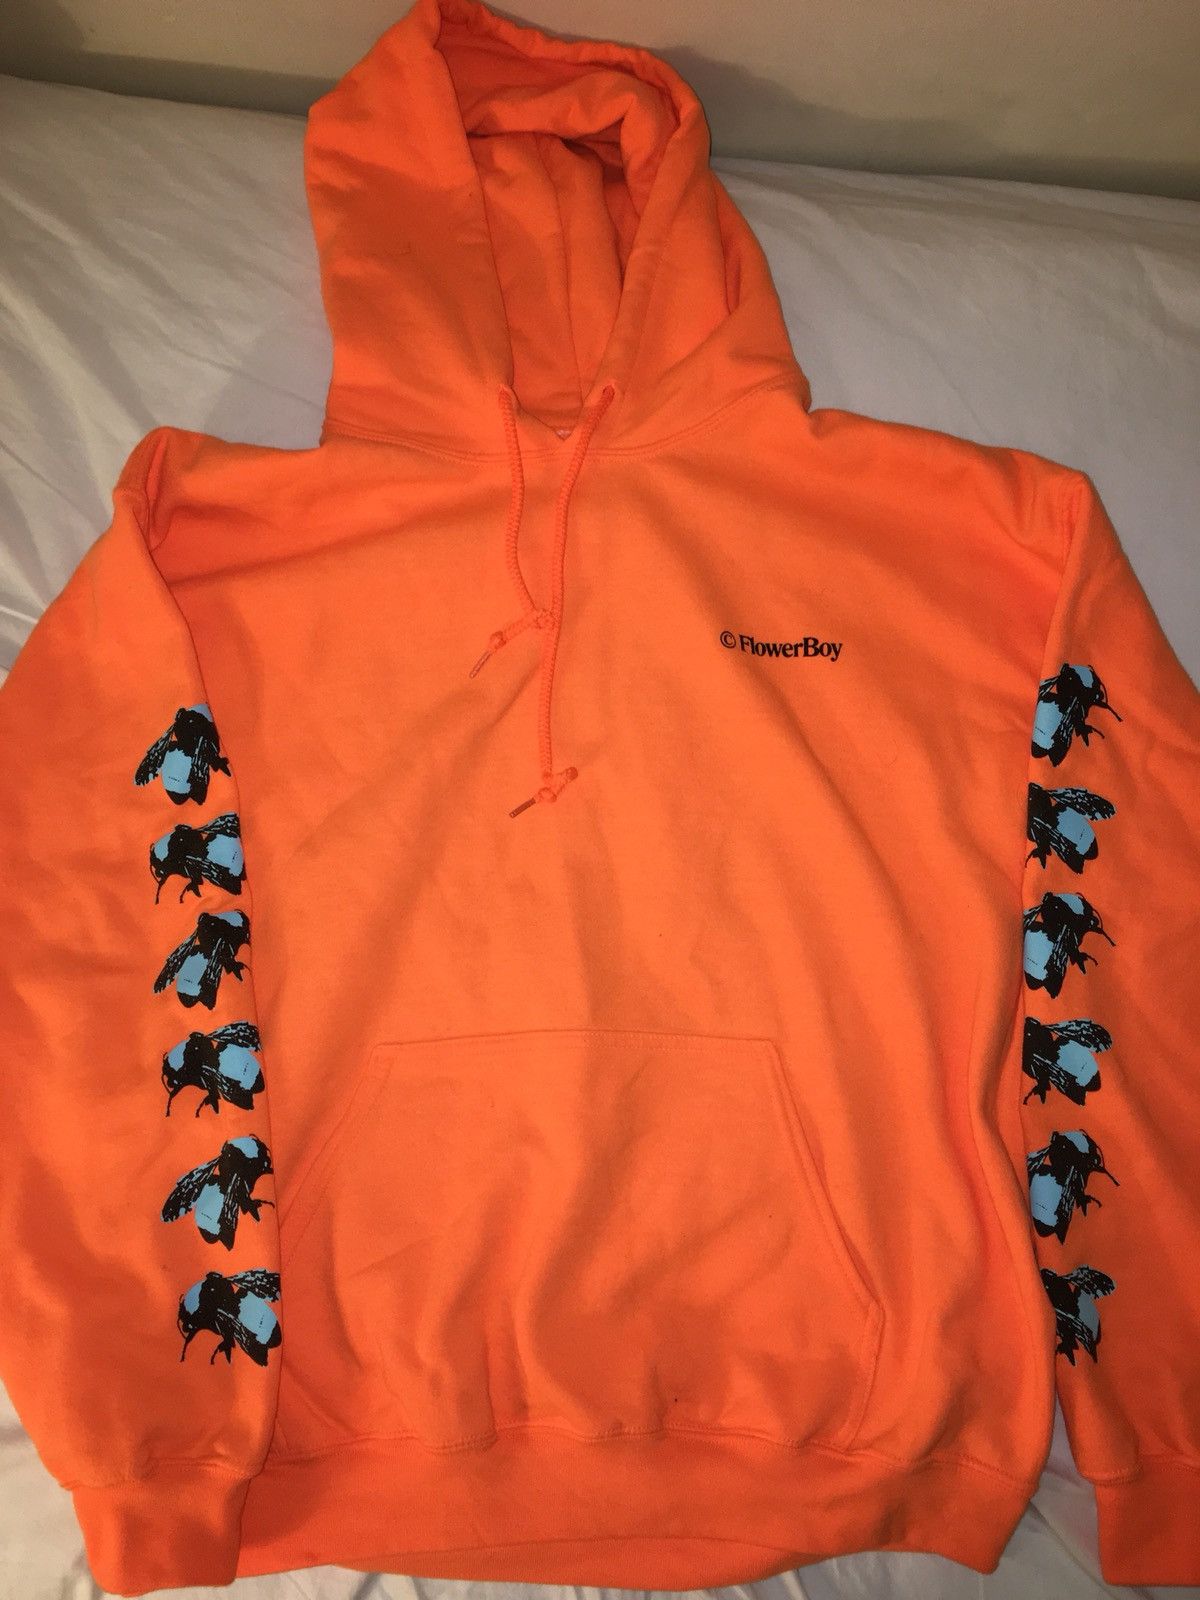 Golf Wang Save The Bees Hoodie Size US L / EU 52-54 / 3 - 2 Preview